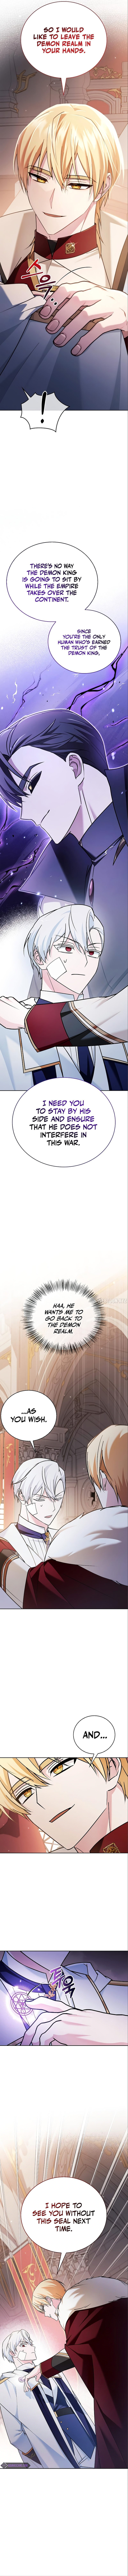 im-not-that-kind-of-talent-chap-33-13